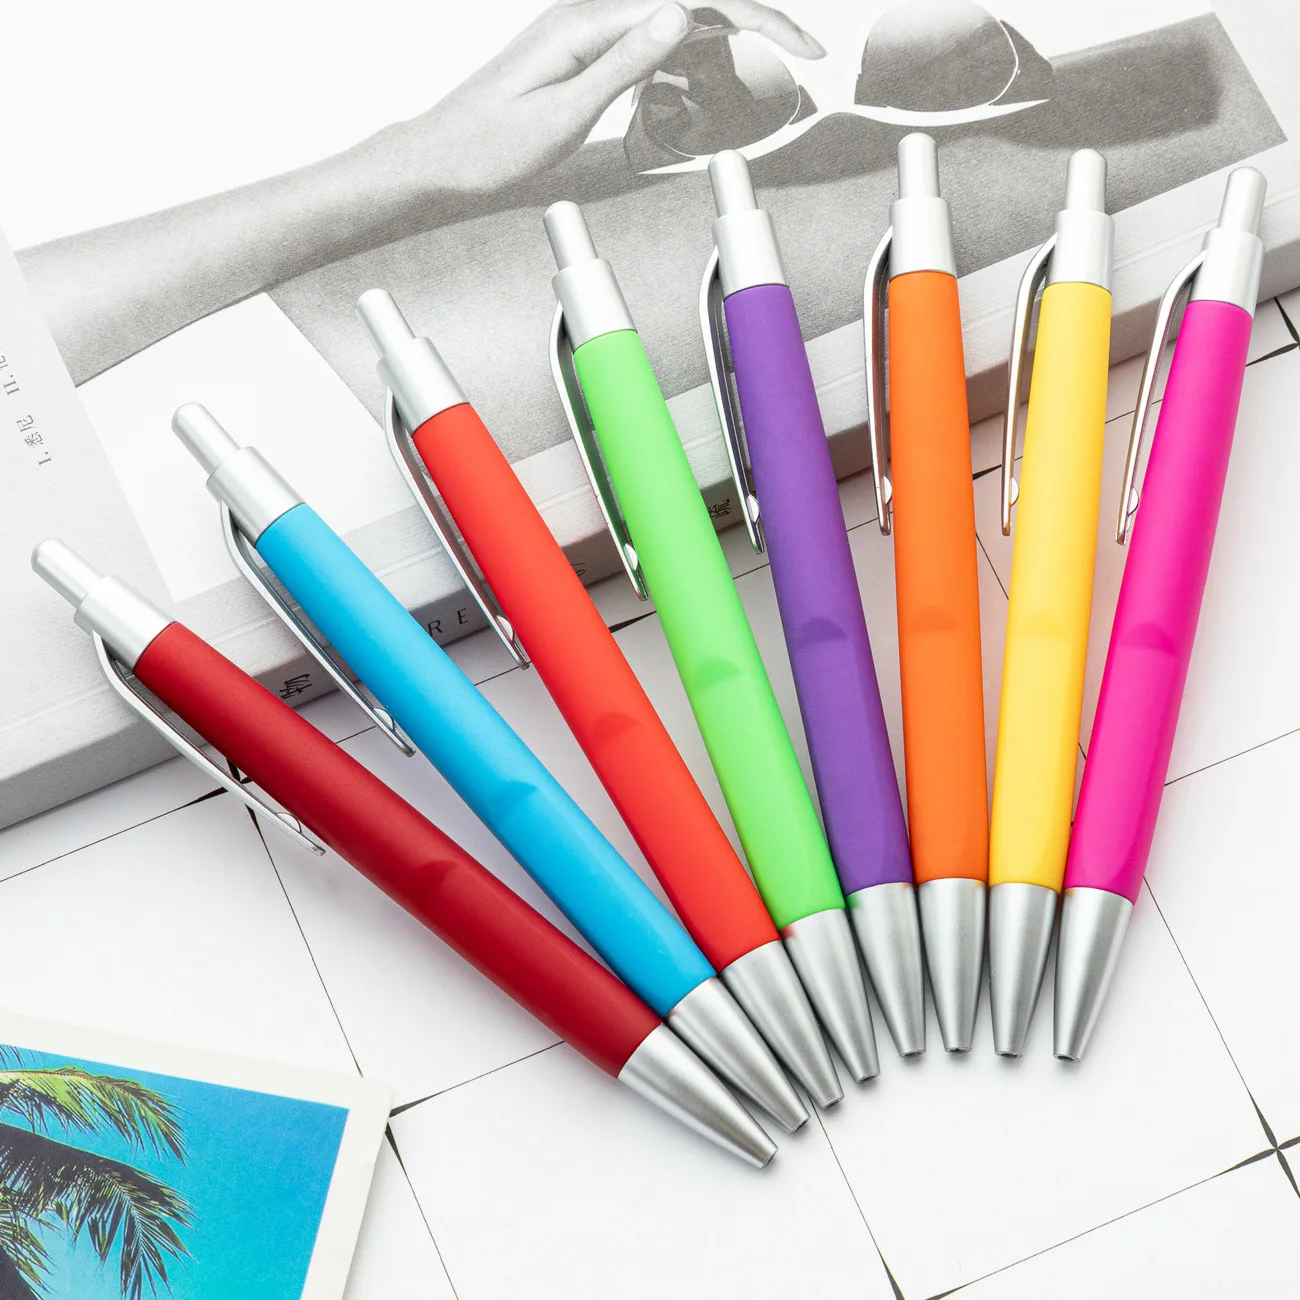 

104 Pcs Business Gift Pen Colorful Glue Spray Ballpoint Pen Press Advertising Pen For Hotel Conference Promotion Pen